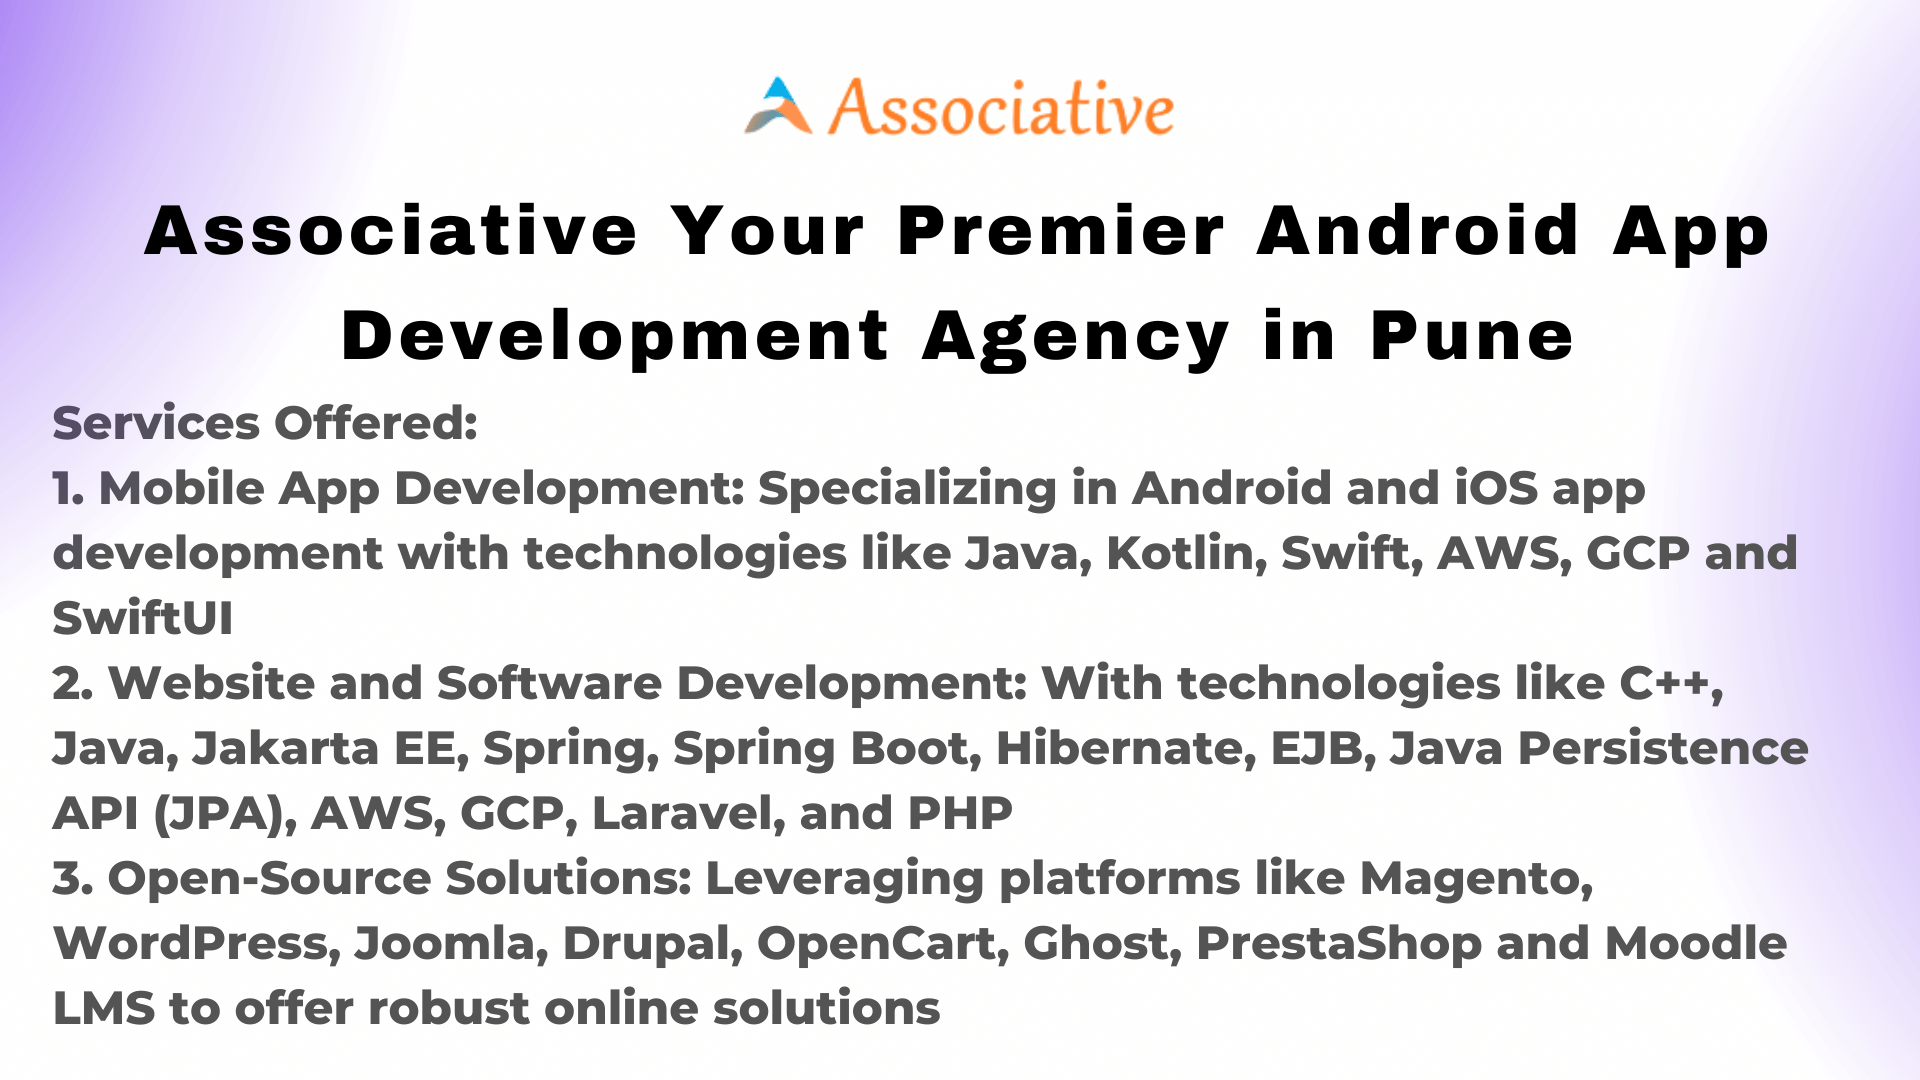 Associative Your Premier Android App Development Agency in Pune